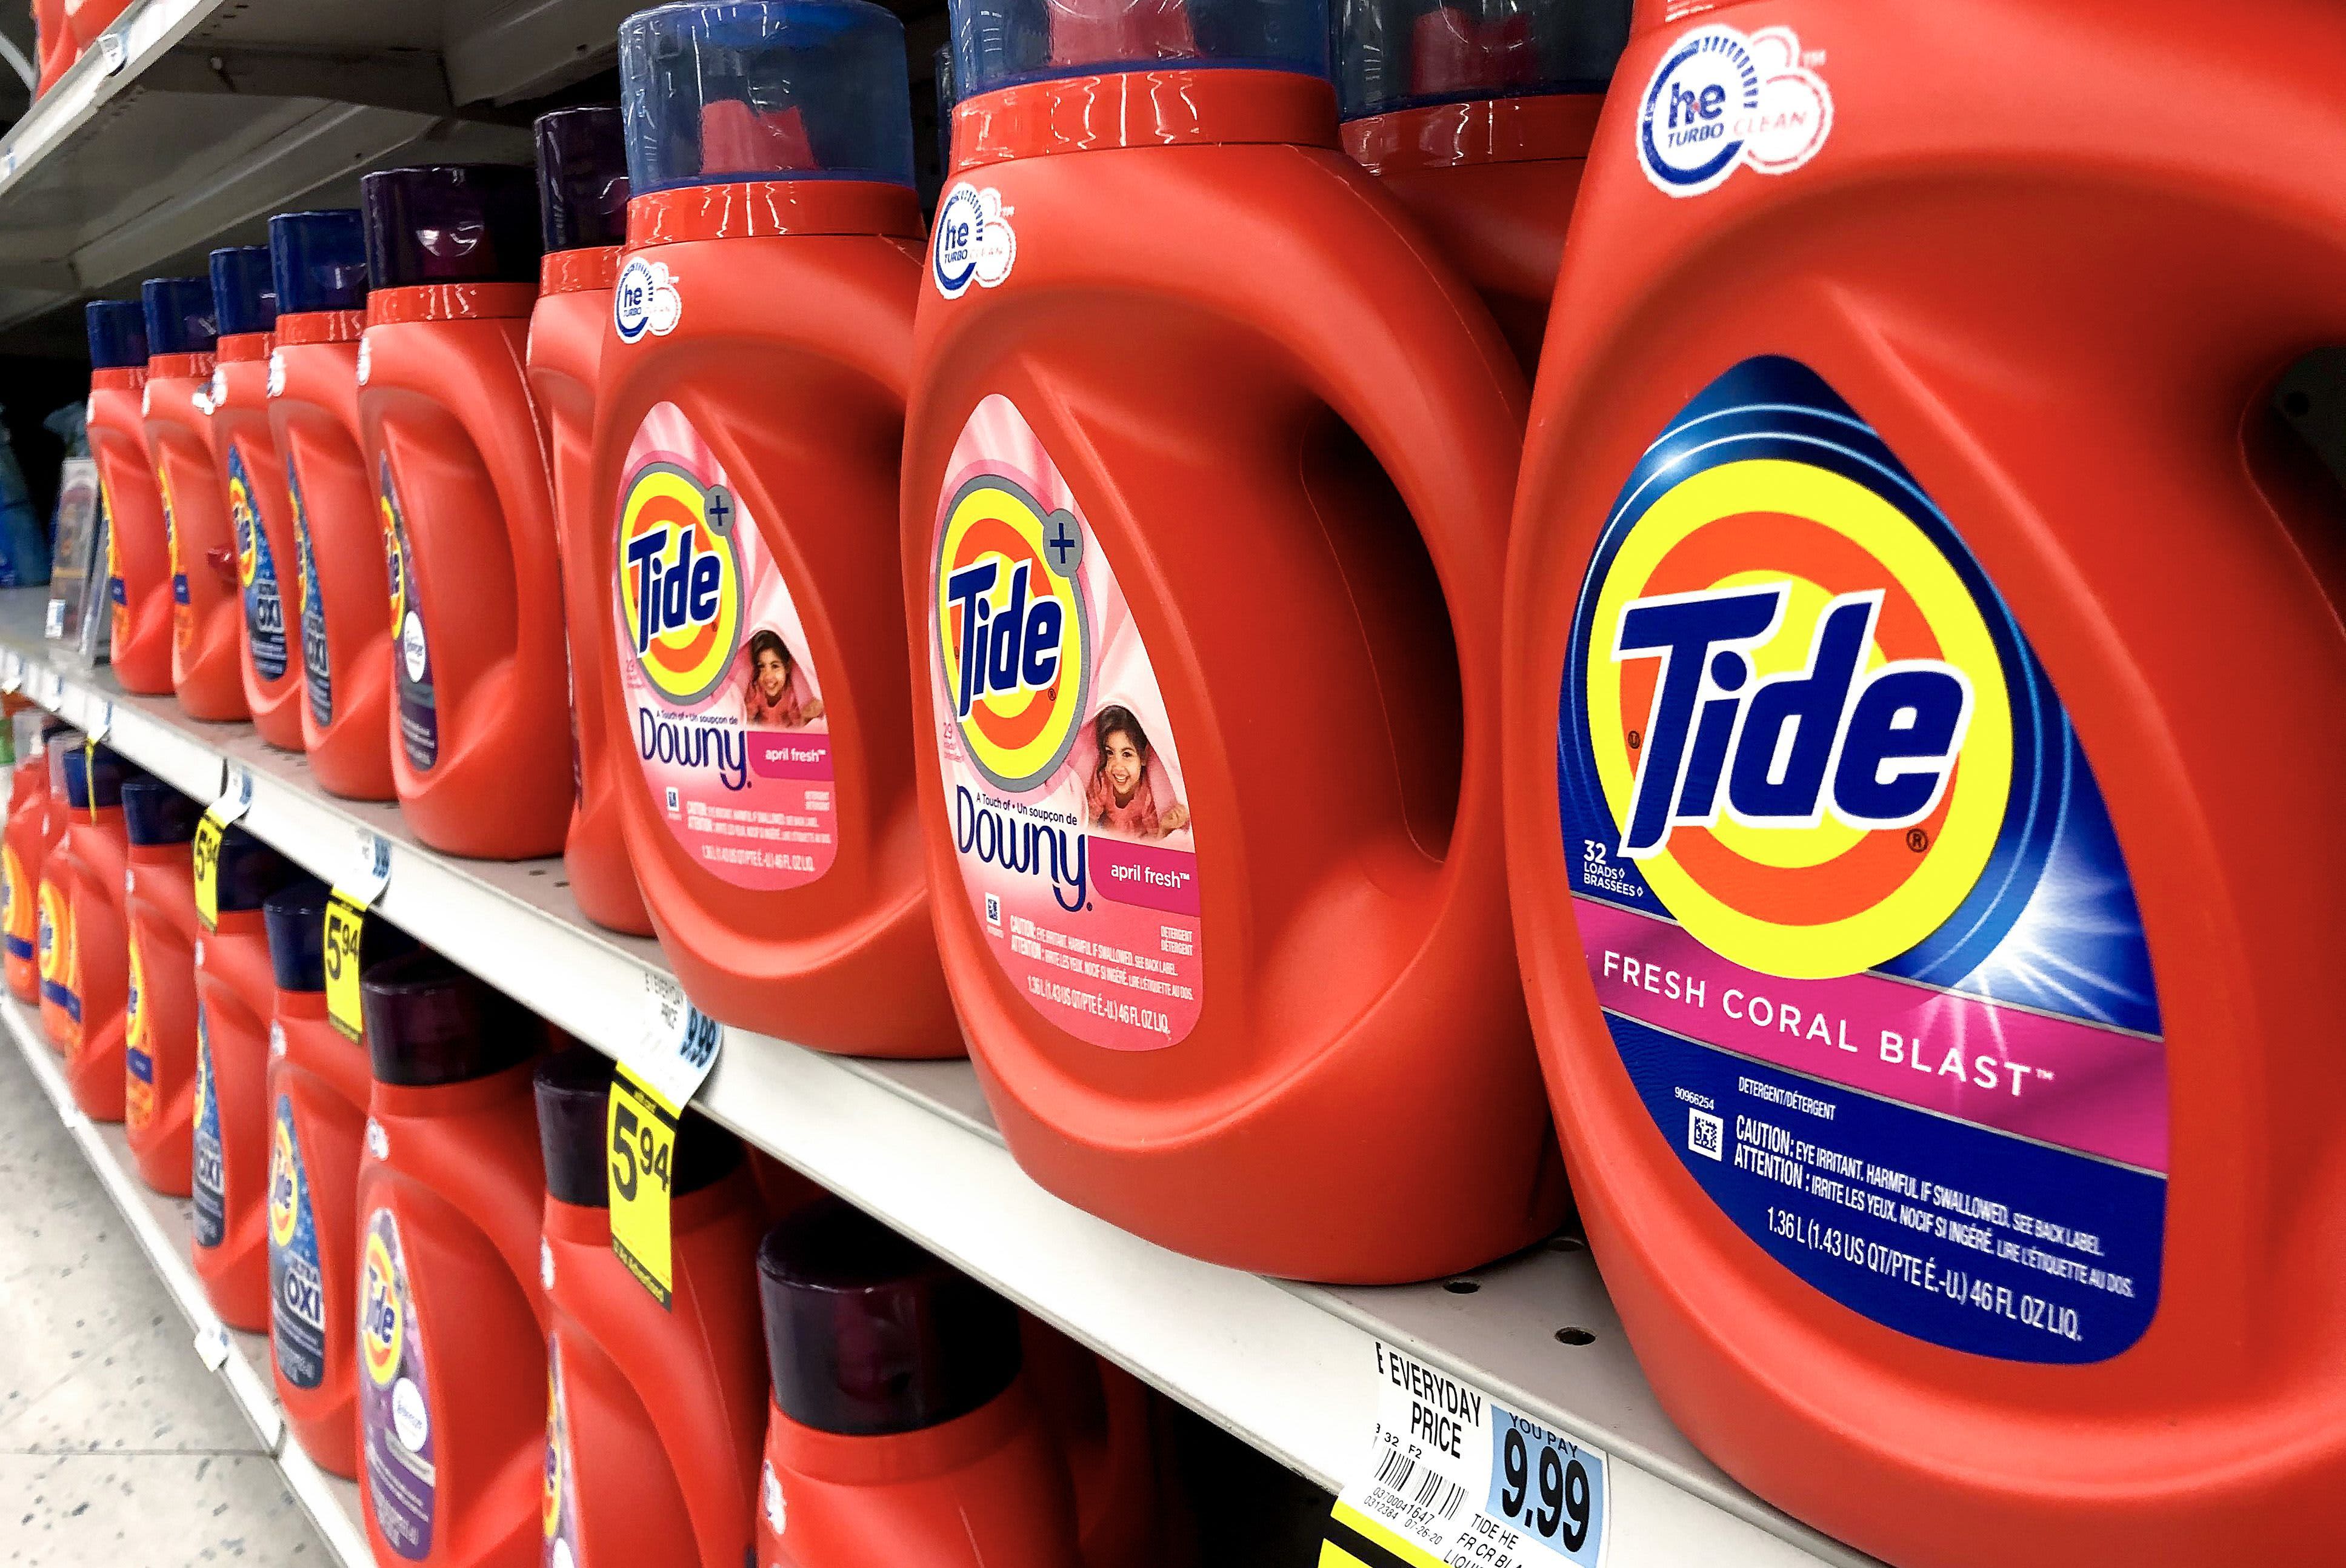 P&G's uneventful quarter and guidance overshadows compelling execution in a tough environment